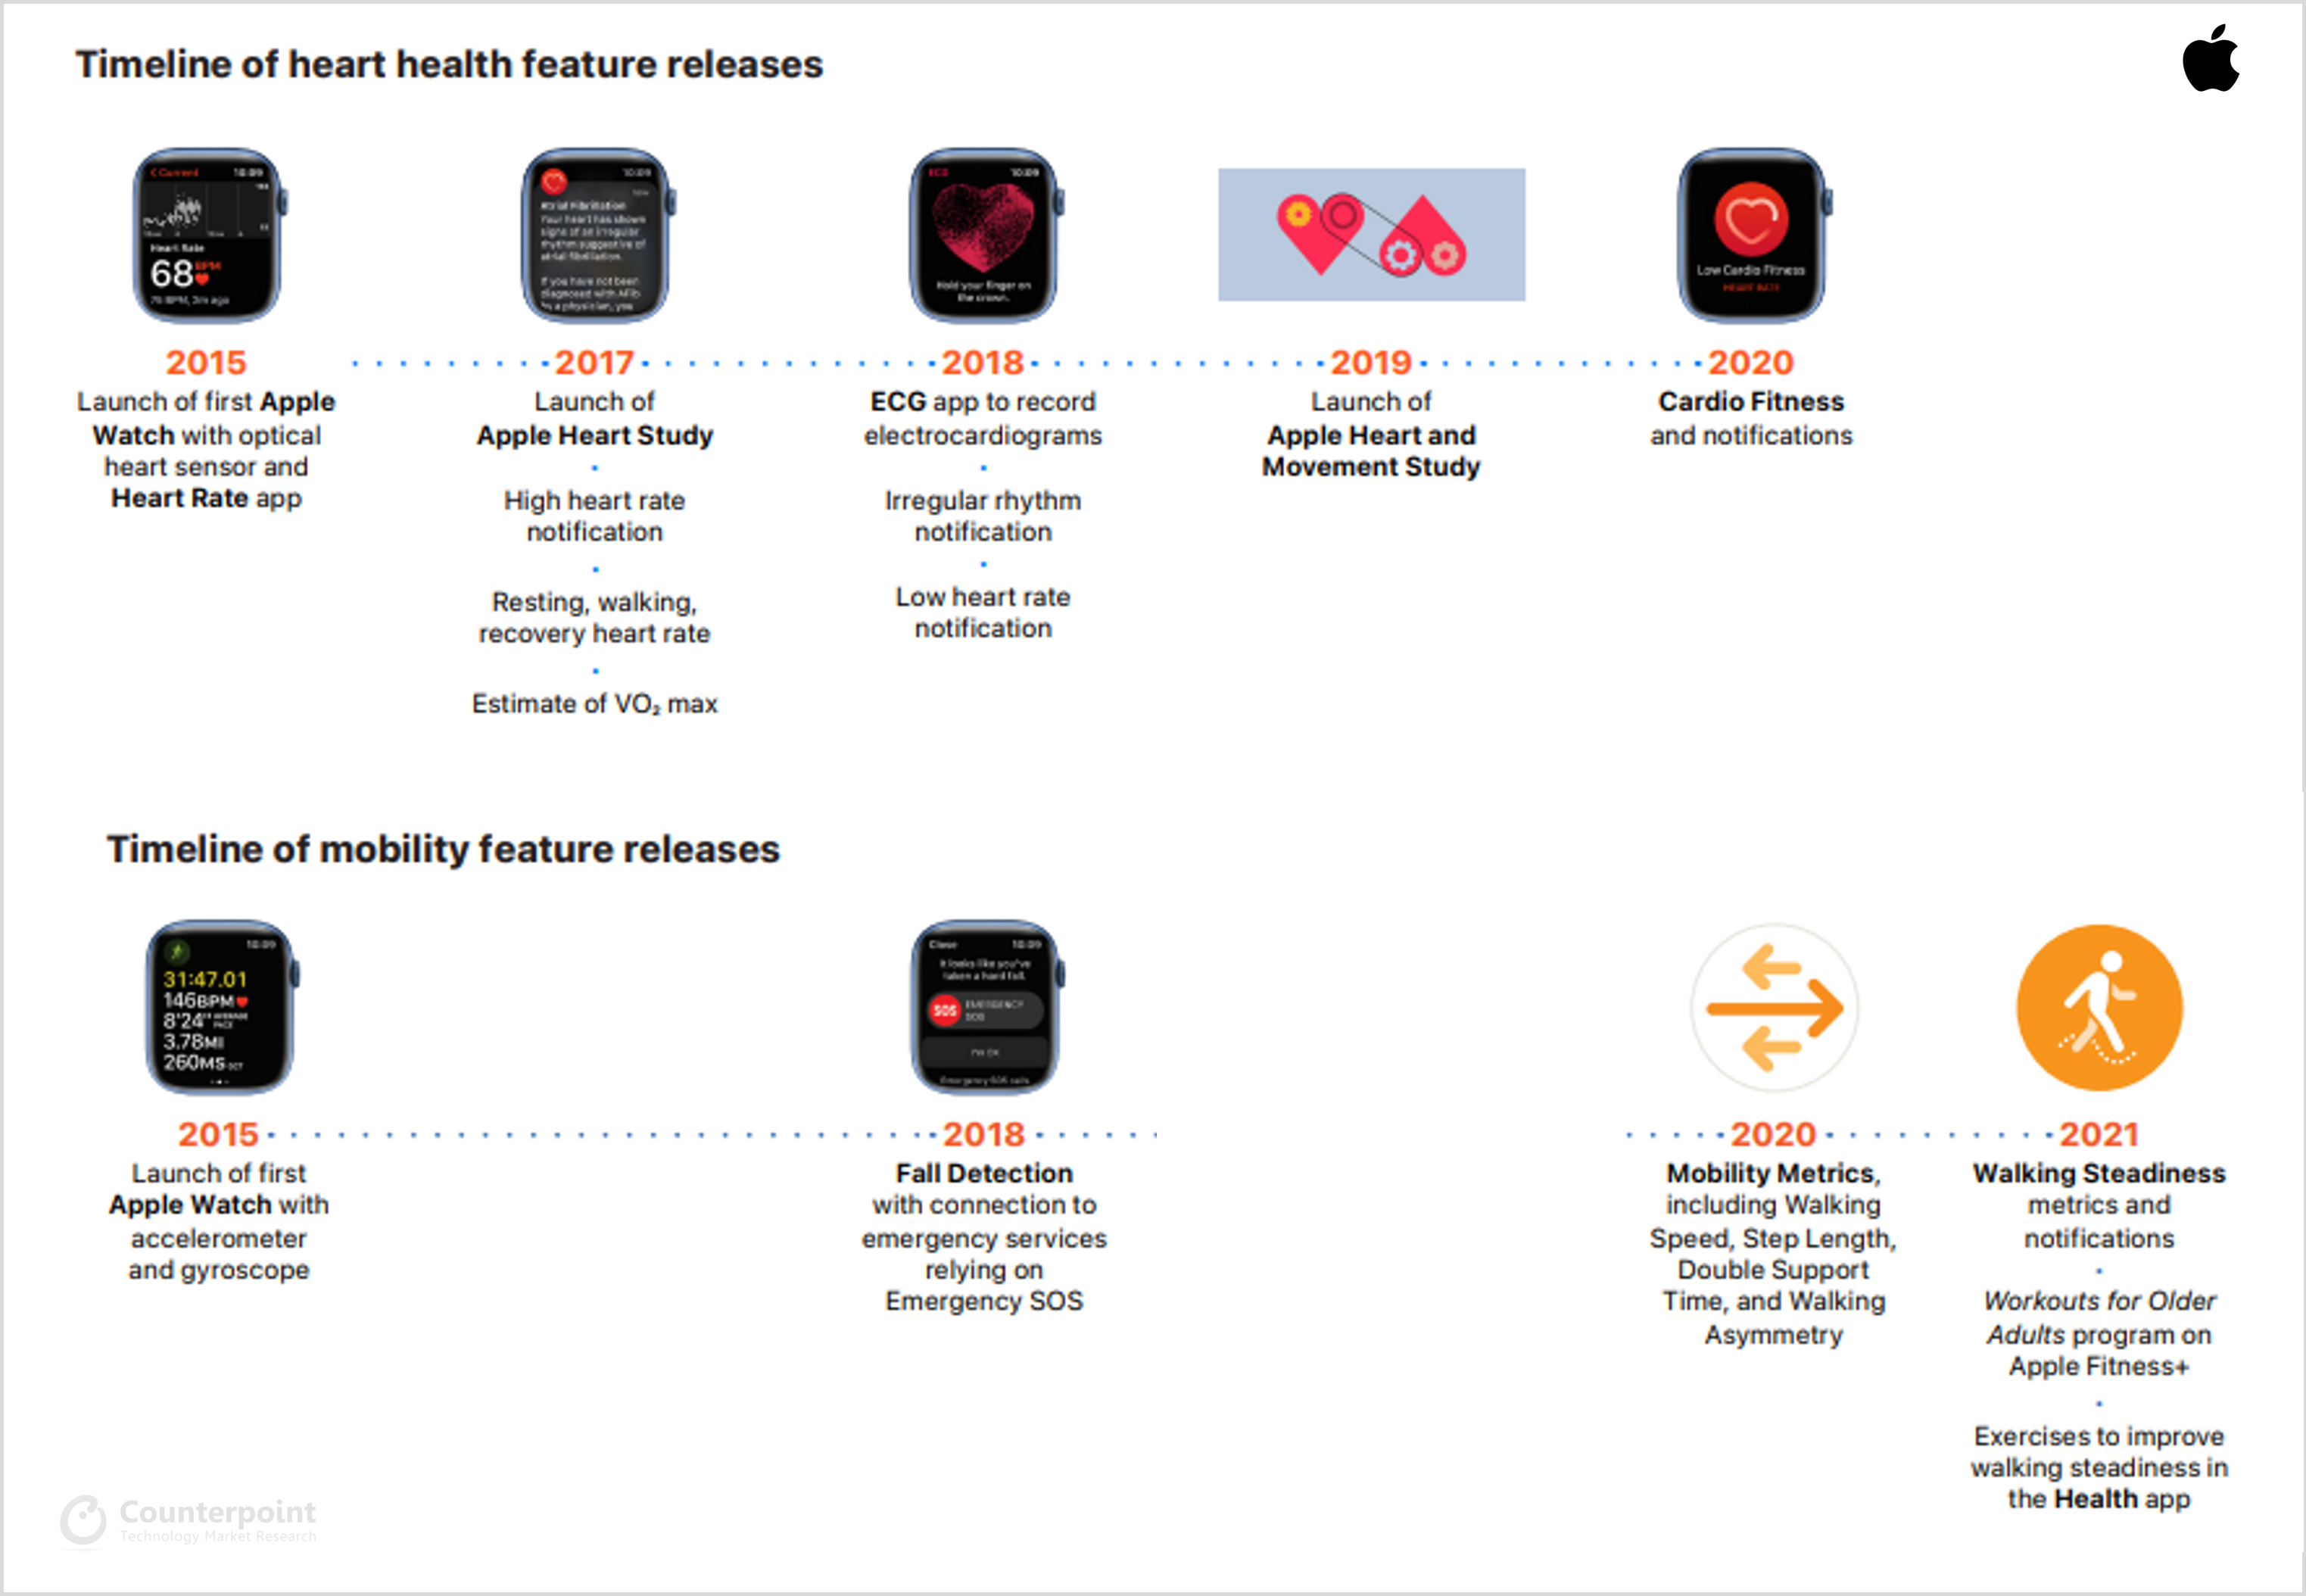 Apple-Health-Key-Features-Heart-Mobility-Timeline-Counterpoint-Research-Analysi